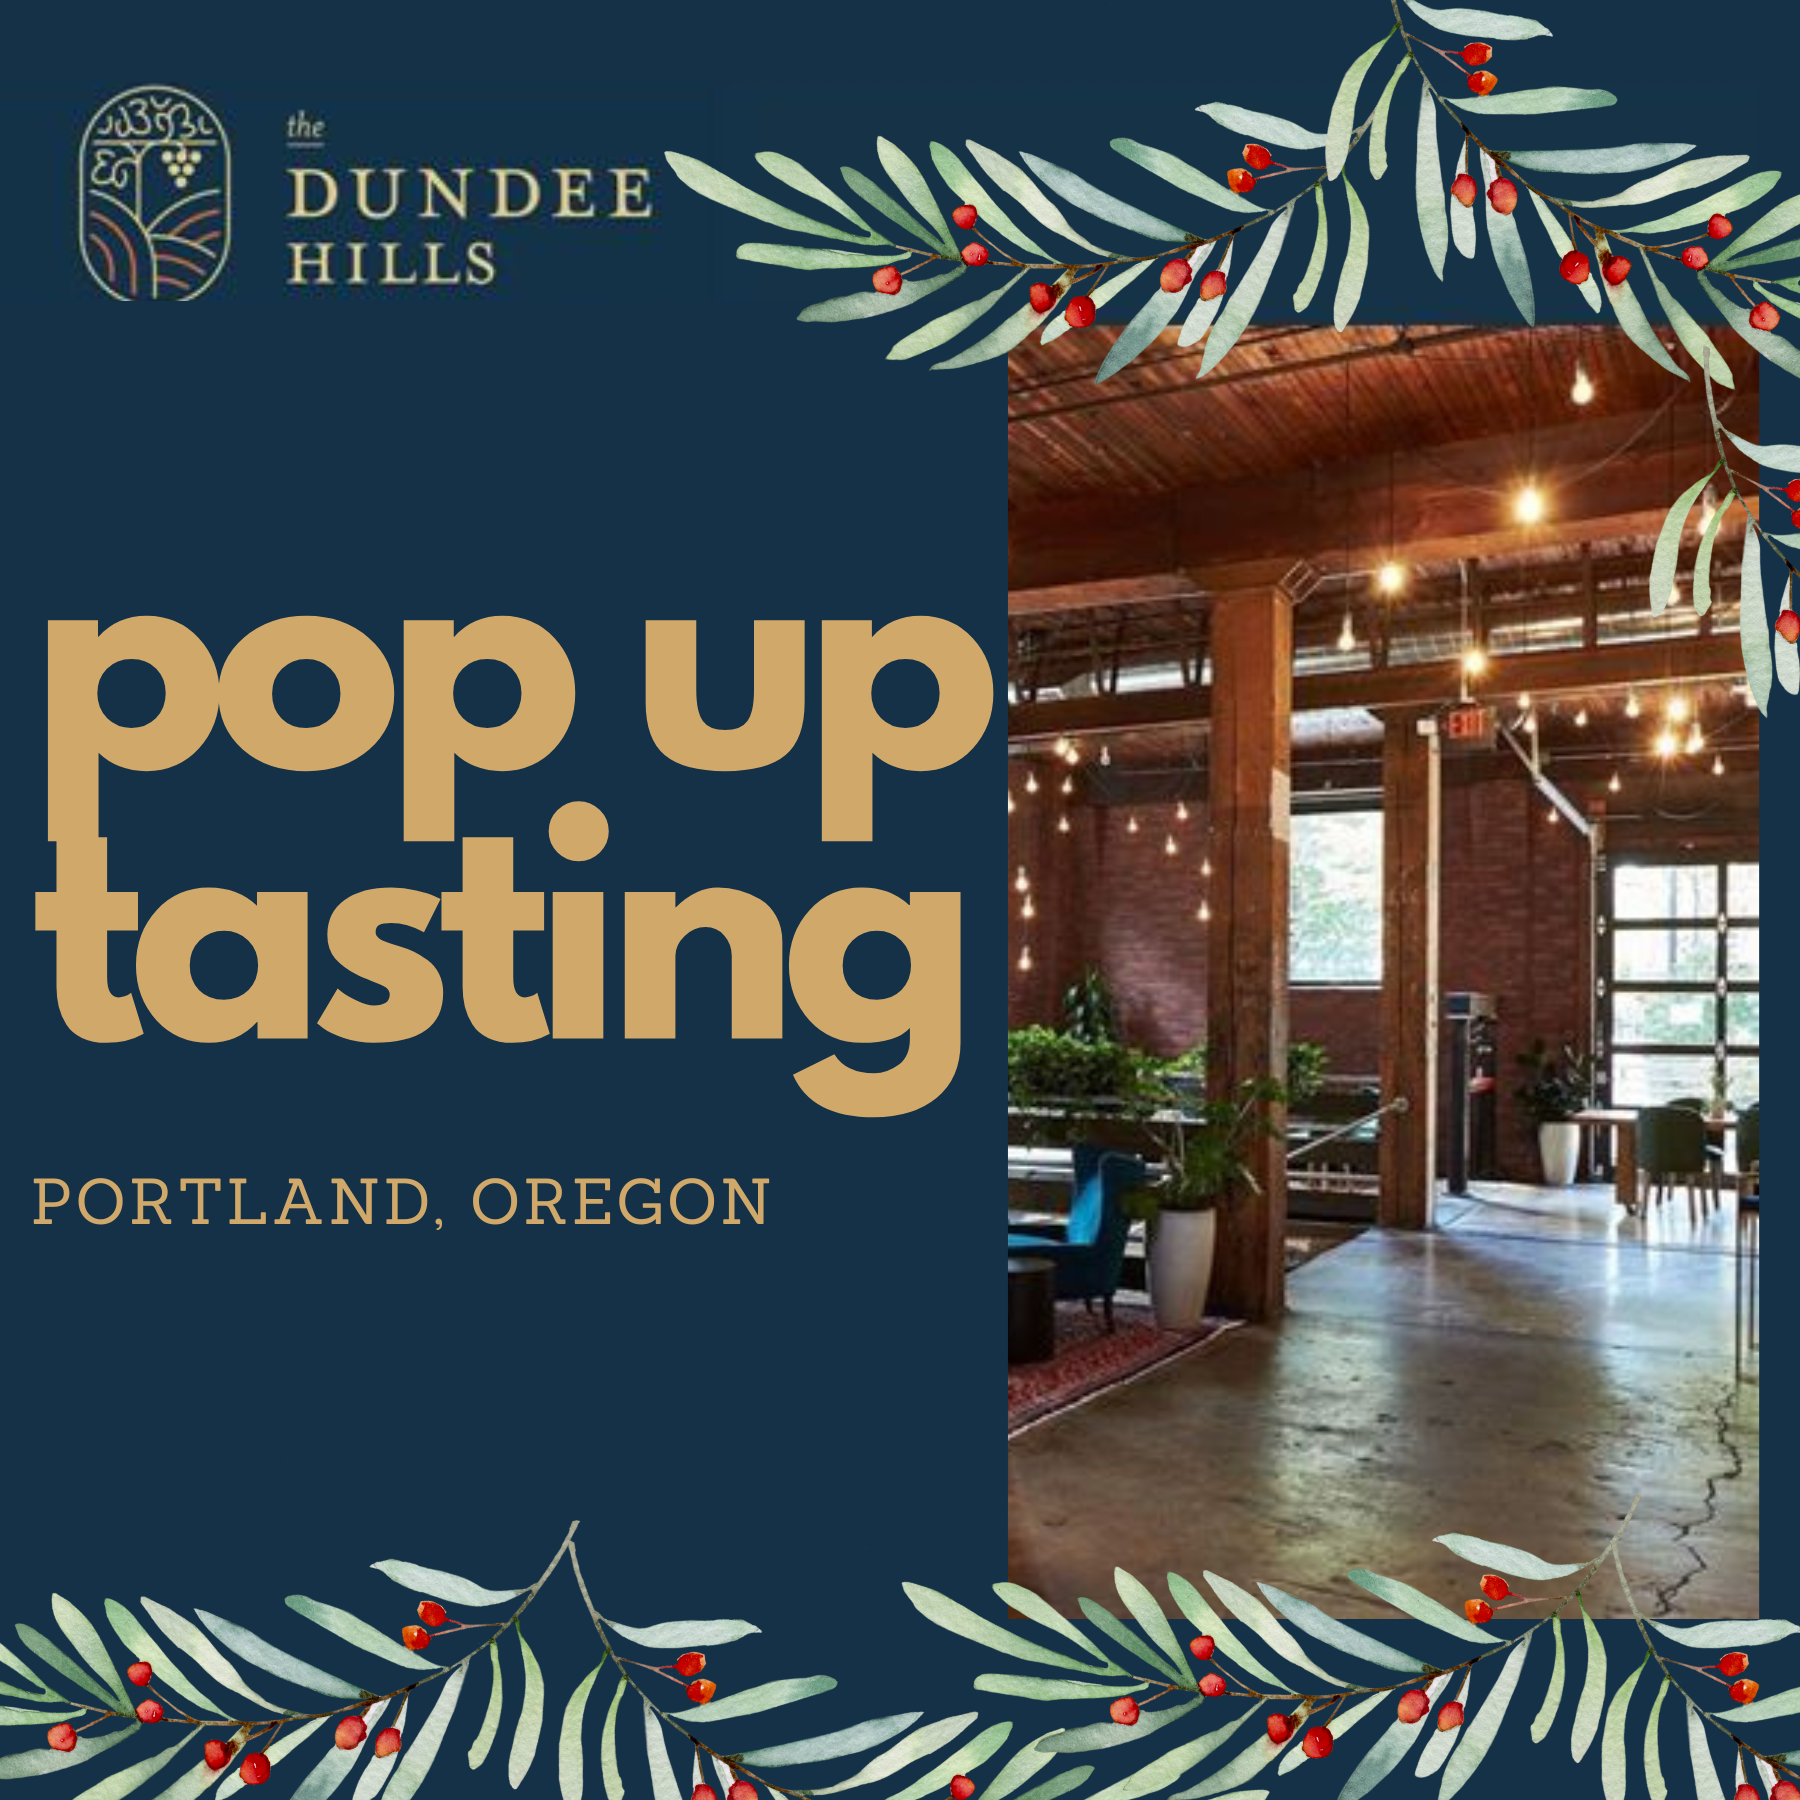 Pop up tasting event in Portland